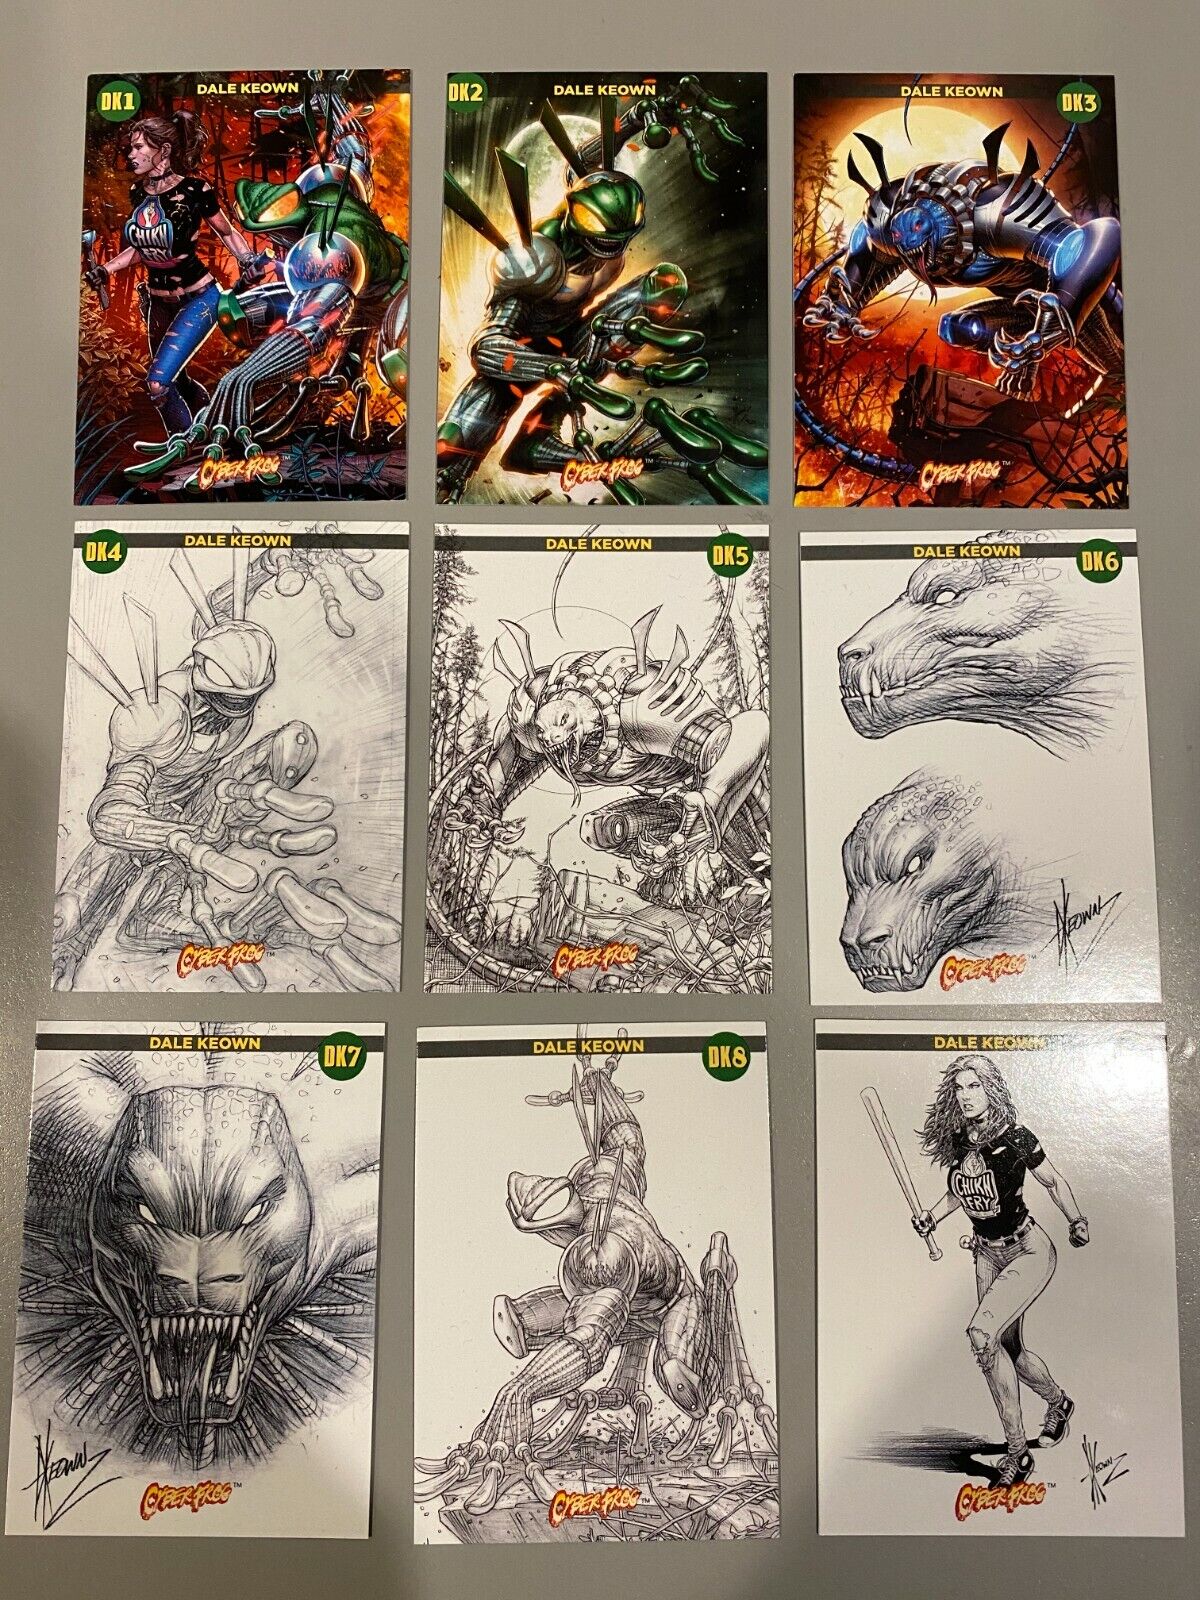 CYBERFROG eBay exclusive DALE KEOWN trading card set 9 NEW CARDS